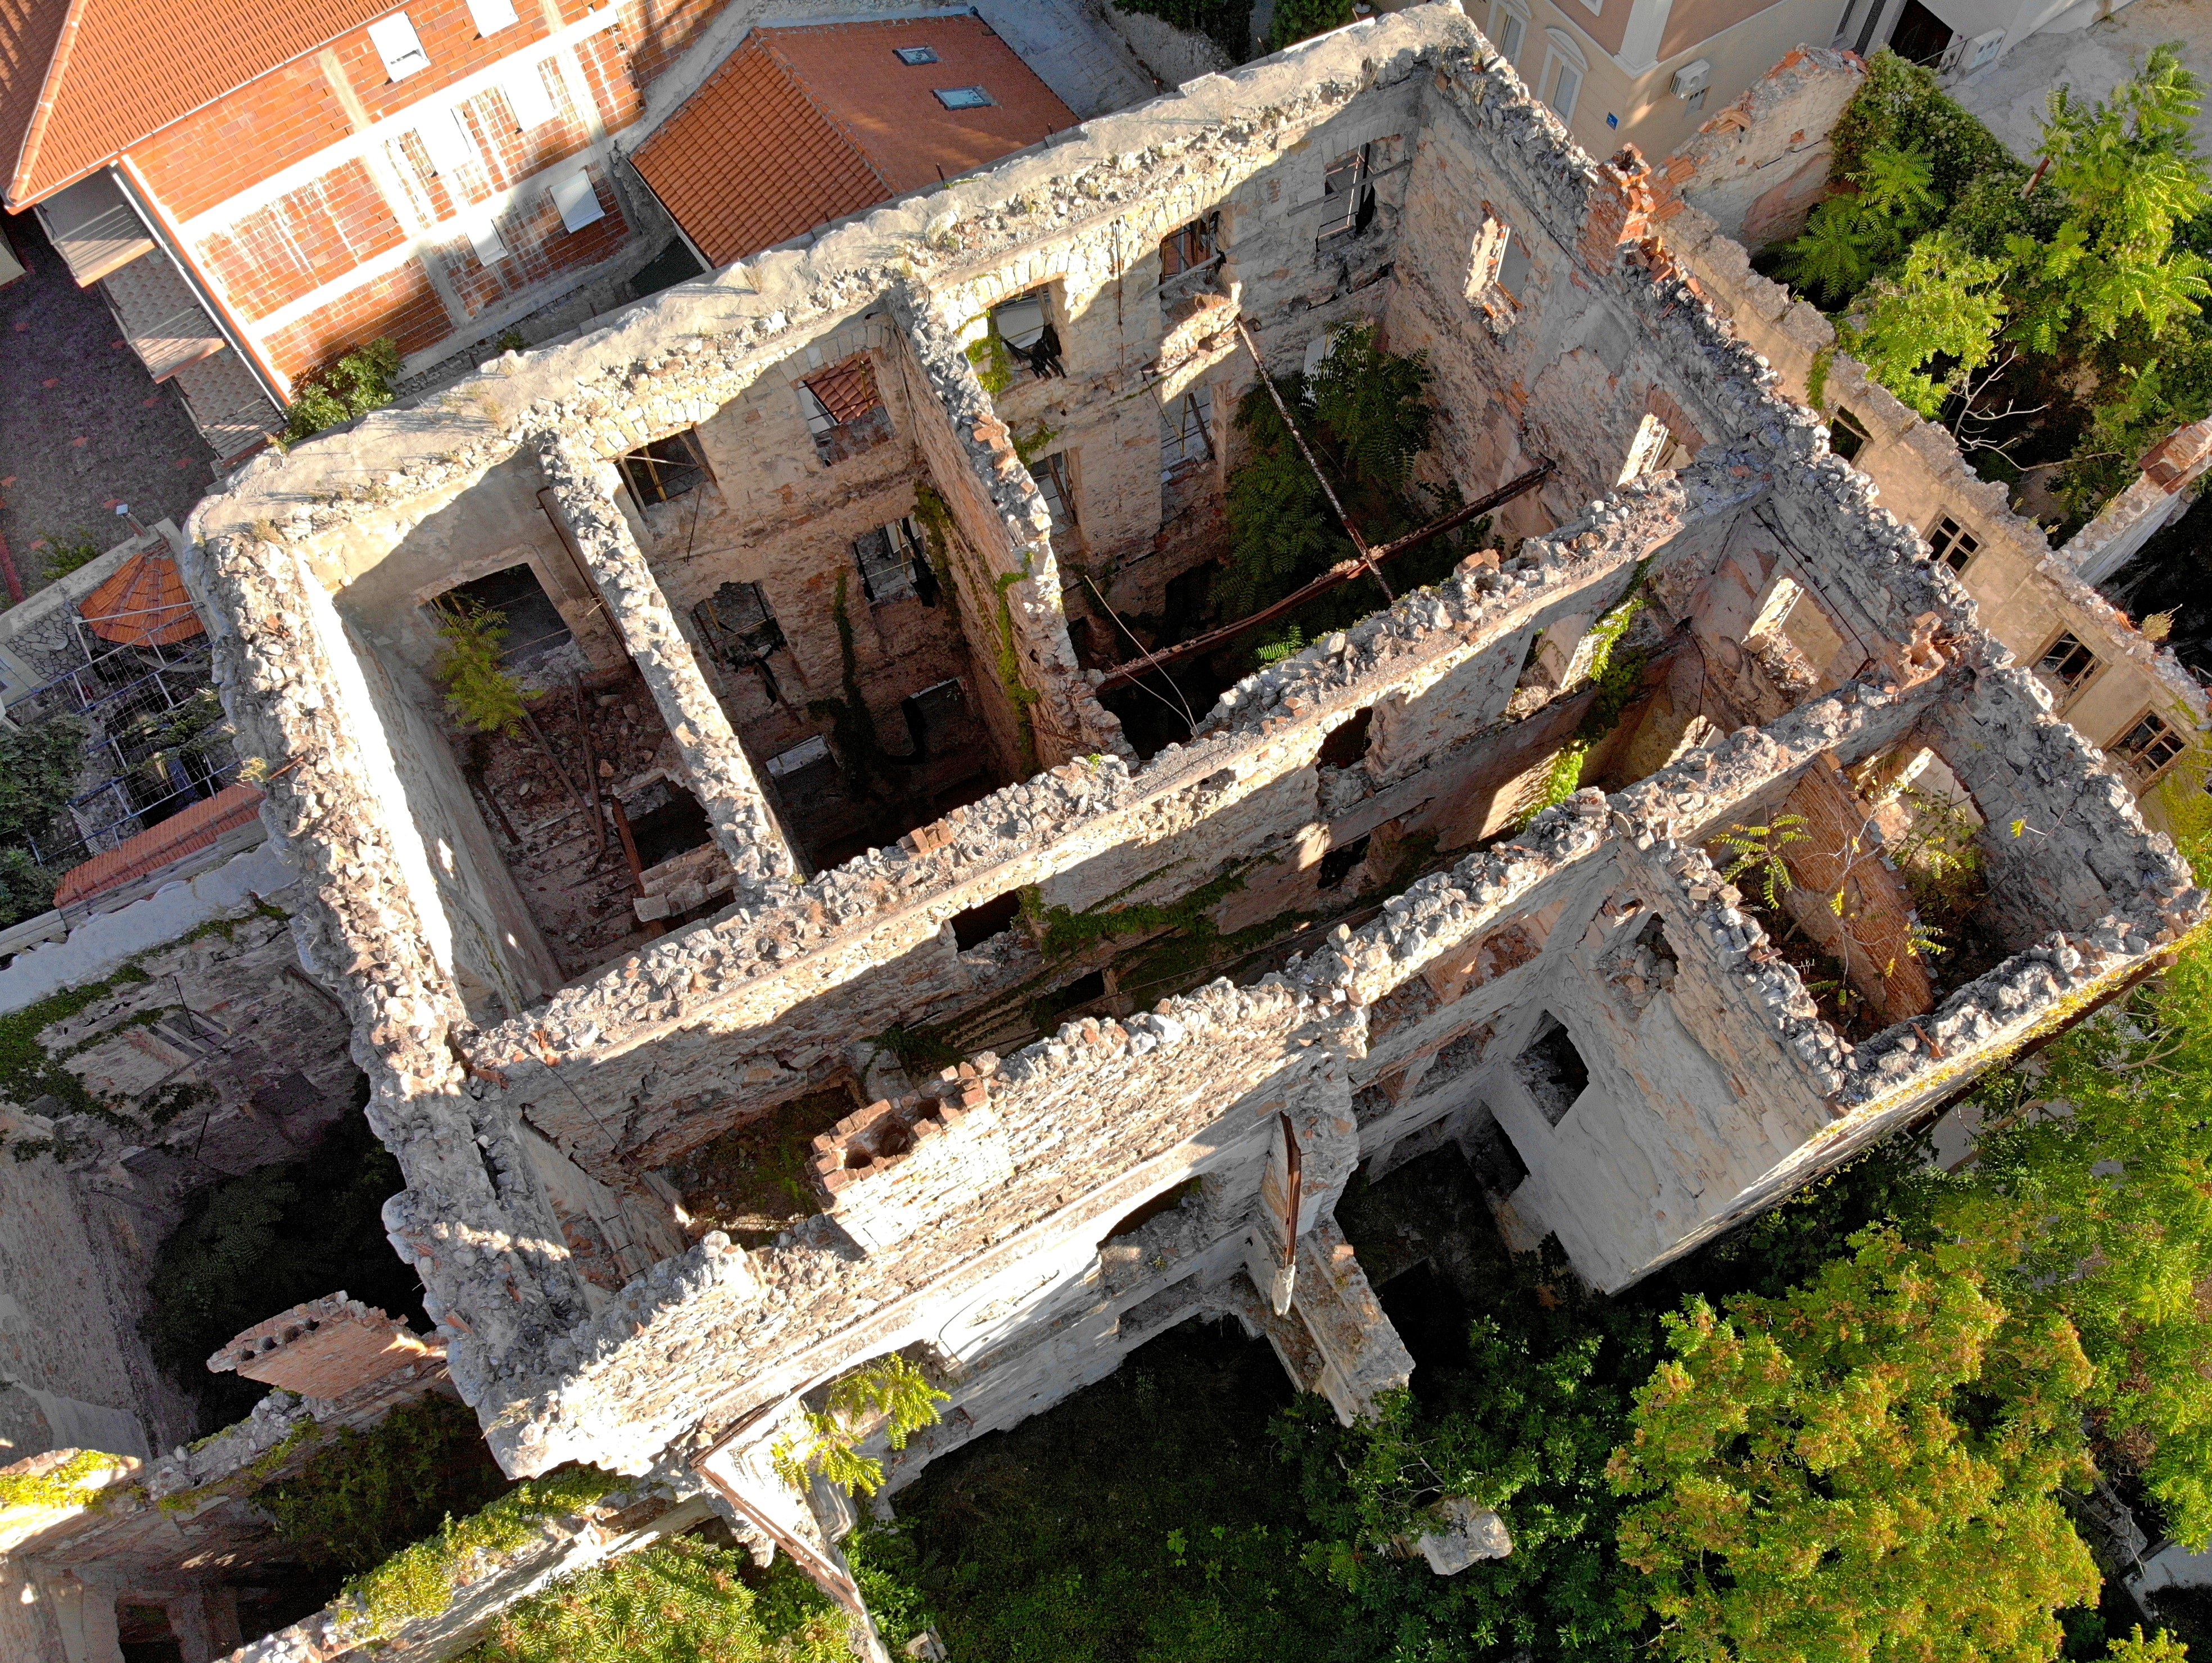 The view on the bombed building from the drone